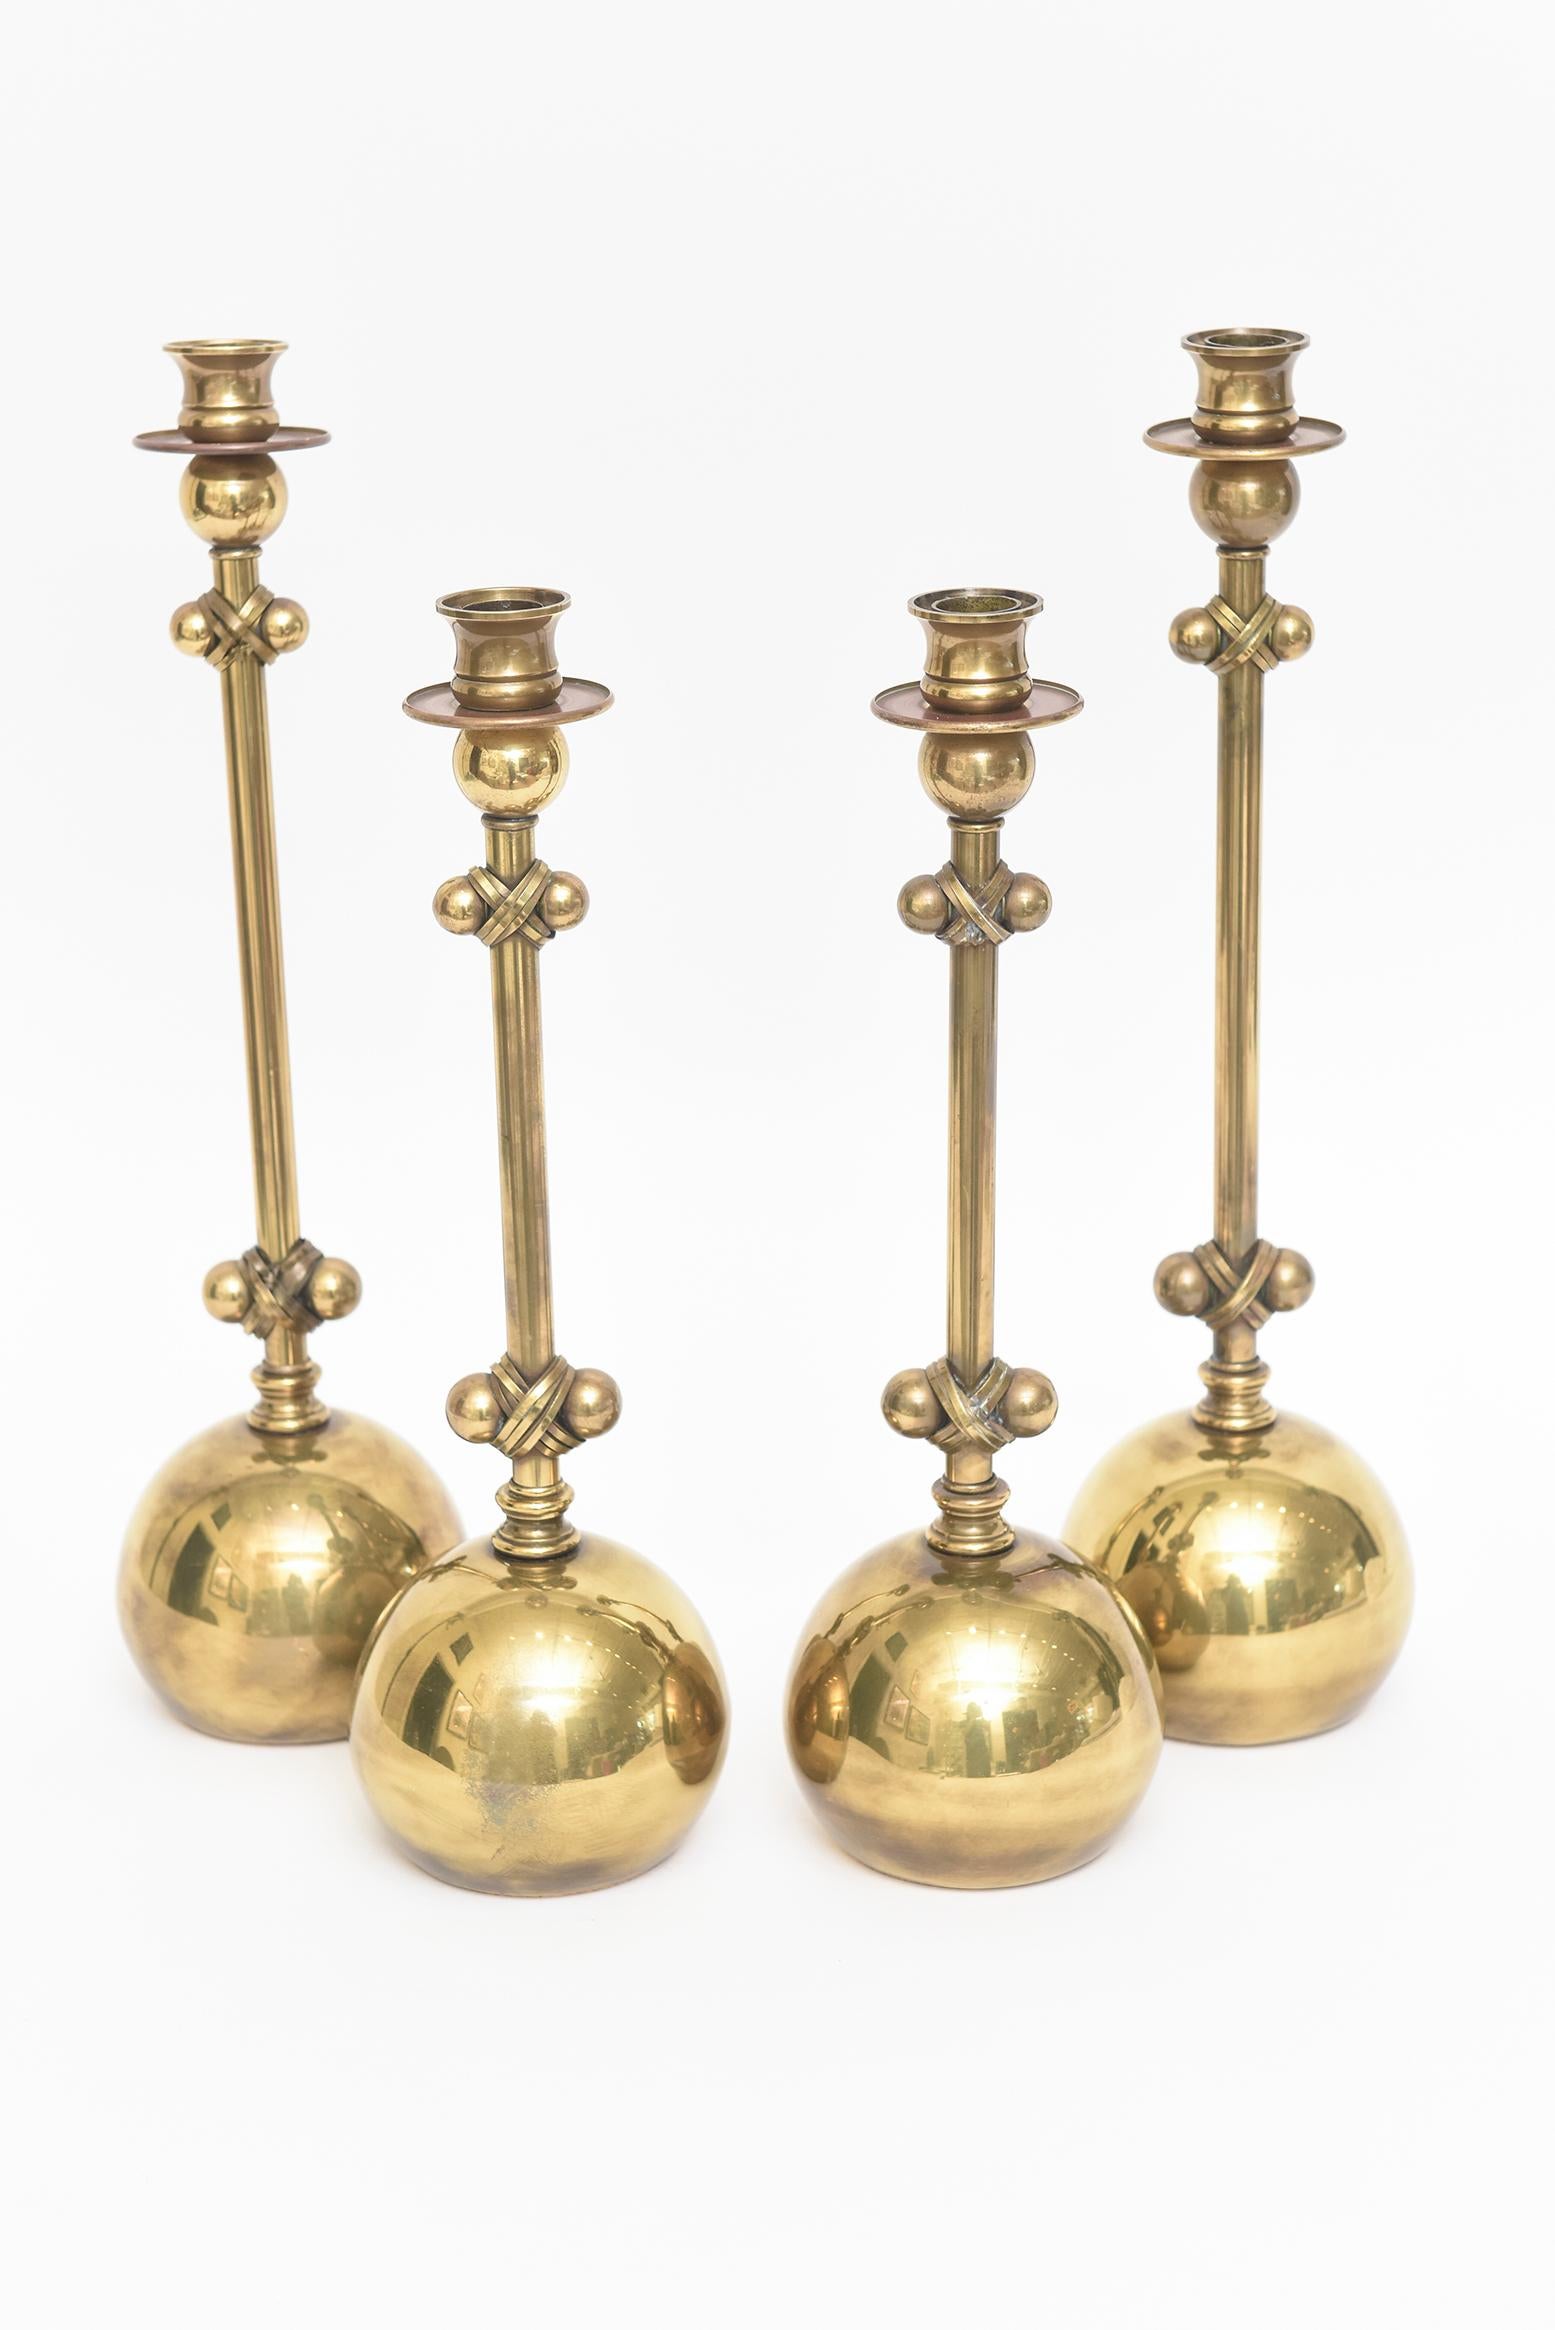 This set of 4 fabulous vintage brass ball candlesticks from the 80's are by Chapman and Co. The set is two different sizes and they have good weight to them. The details on them are so interesting. The crisscrossing of the wrapped brass on the top